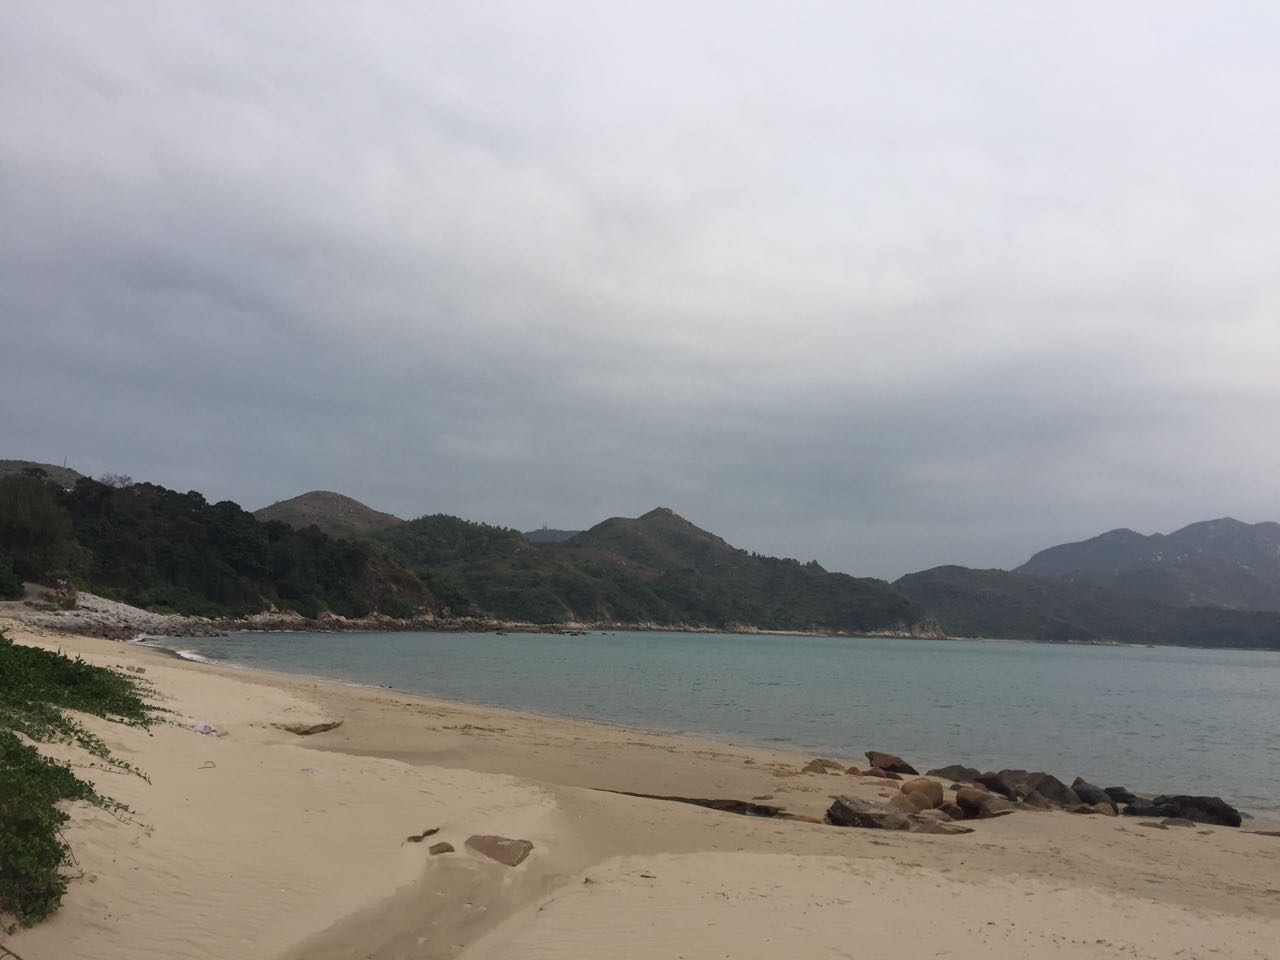 Hong Kong Day Tripper: Find Some Peace on Lamma Island